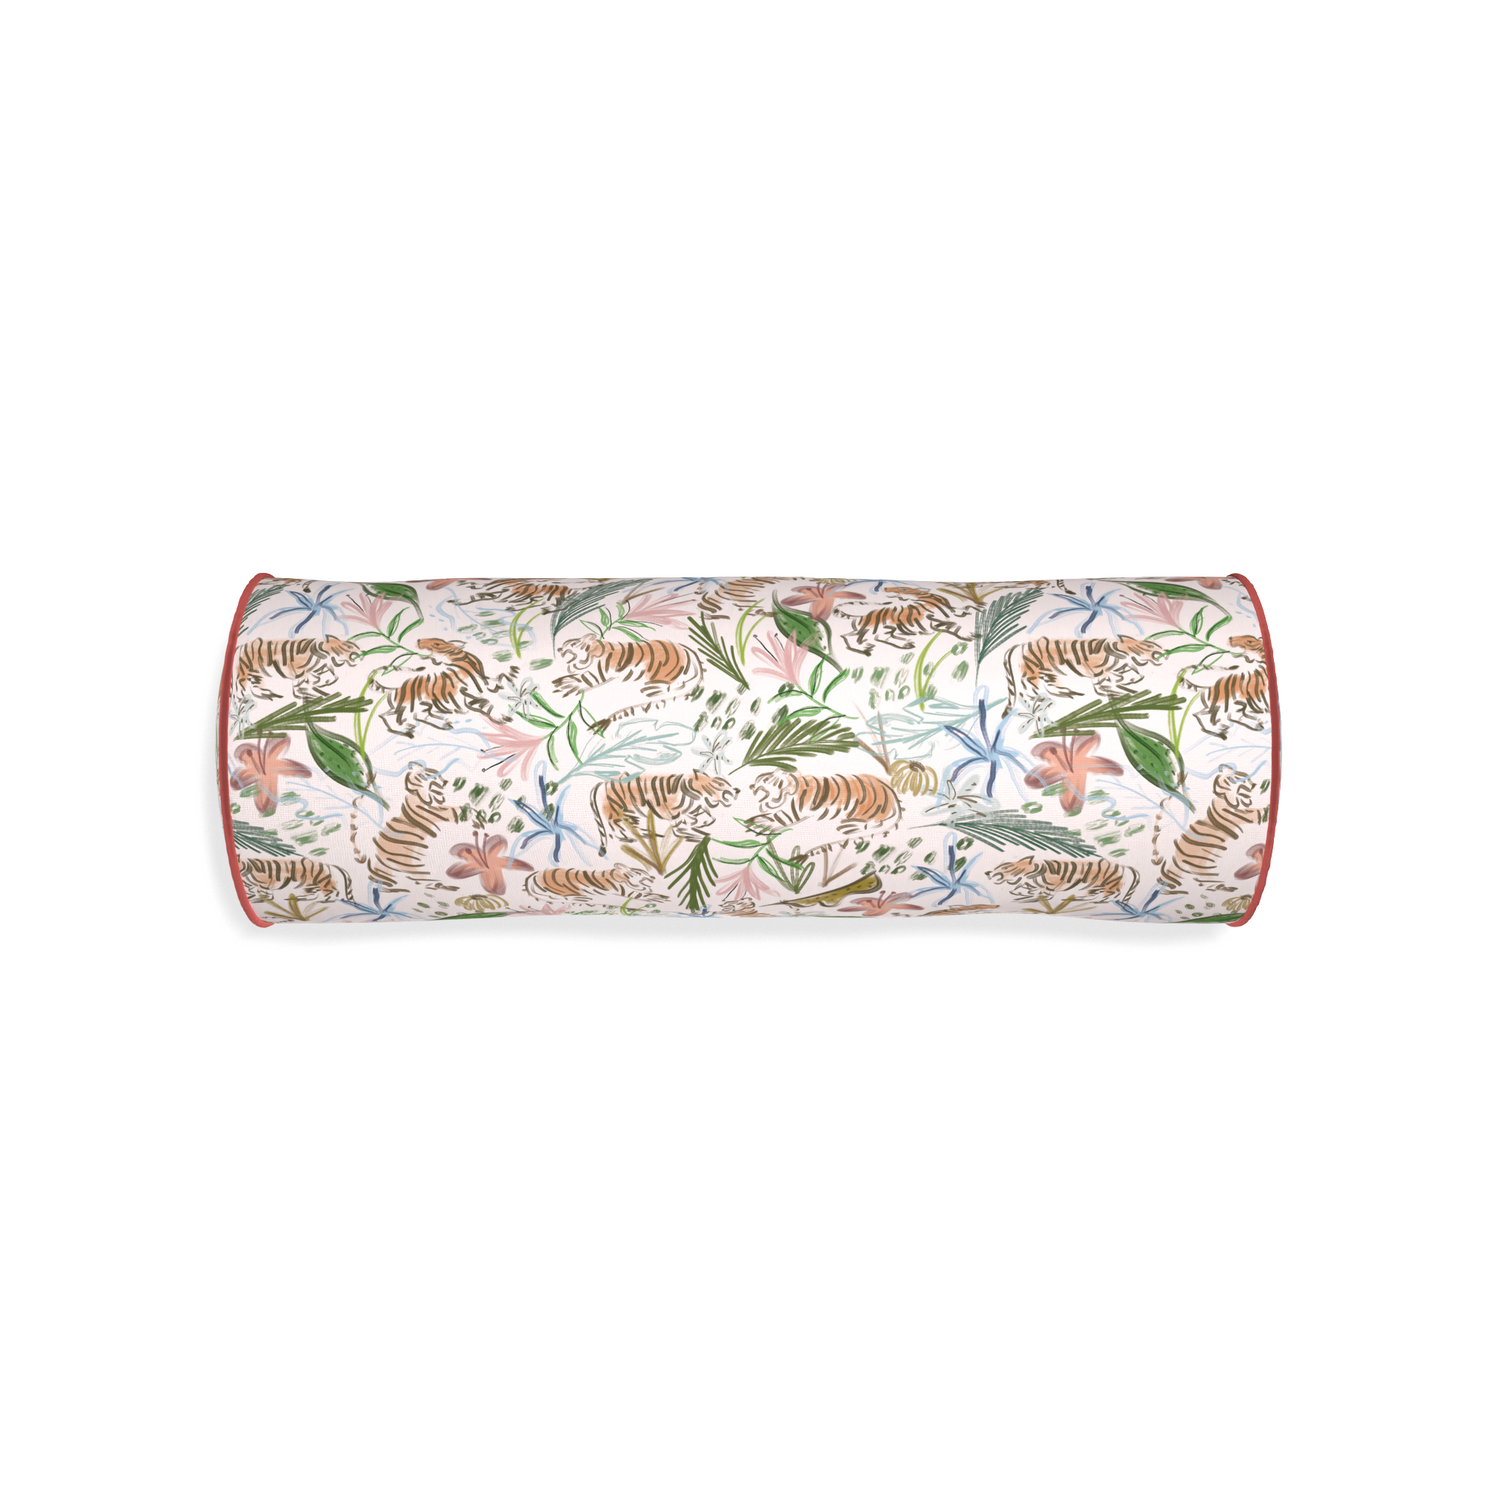 Bolster frida pink custom pillow with c piping on white background